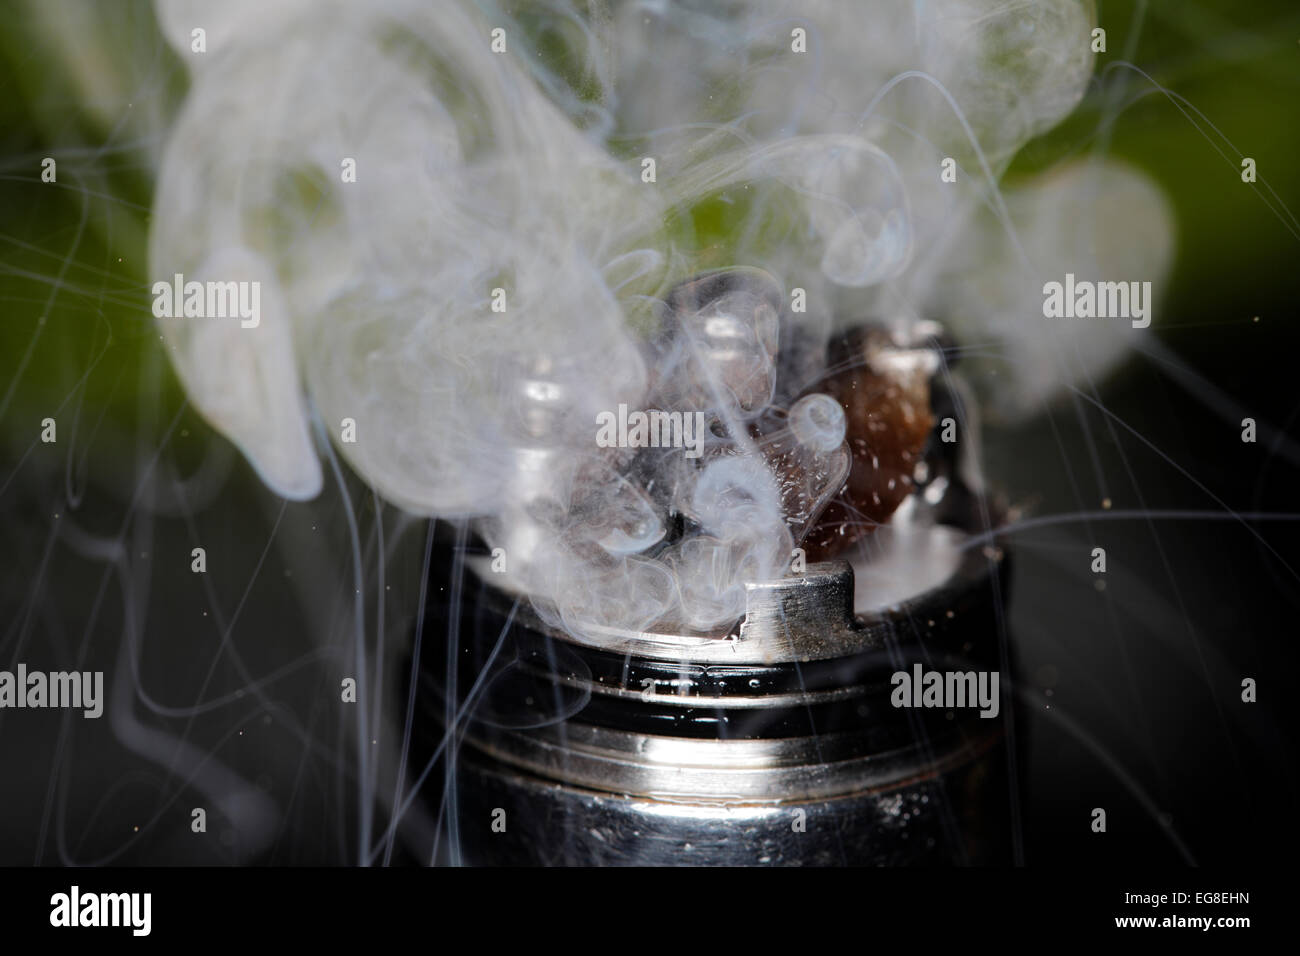 A mod-type e-cigarette spews out microscopic particles as well as vapors. Stock Photo